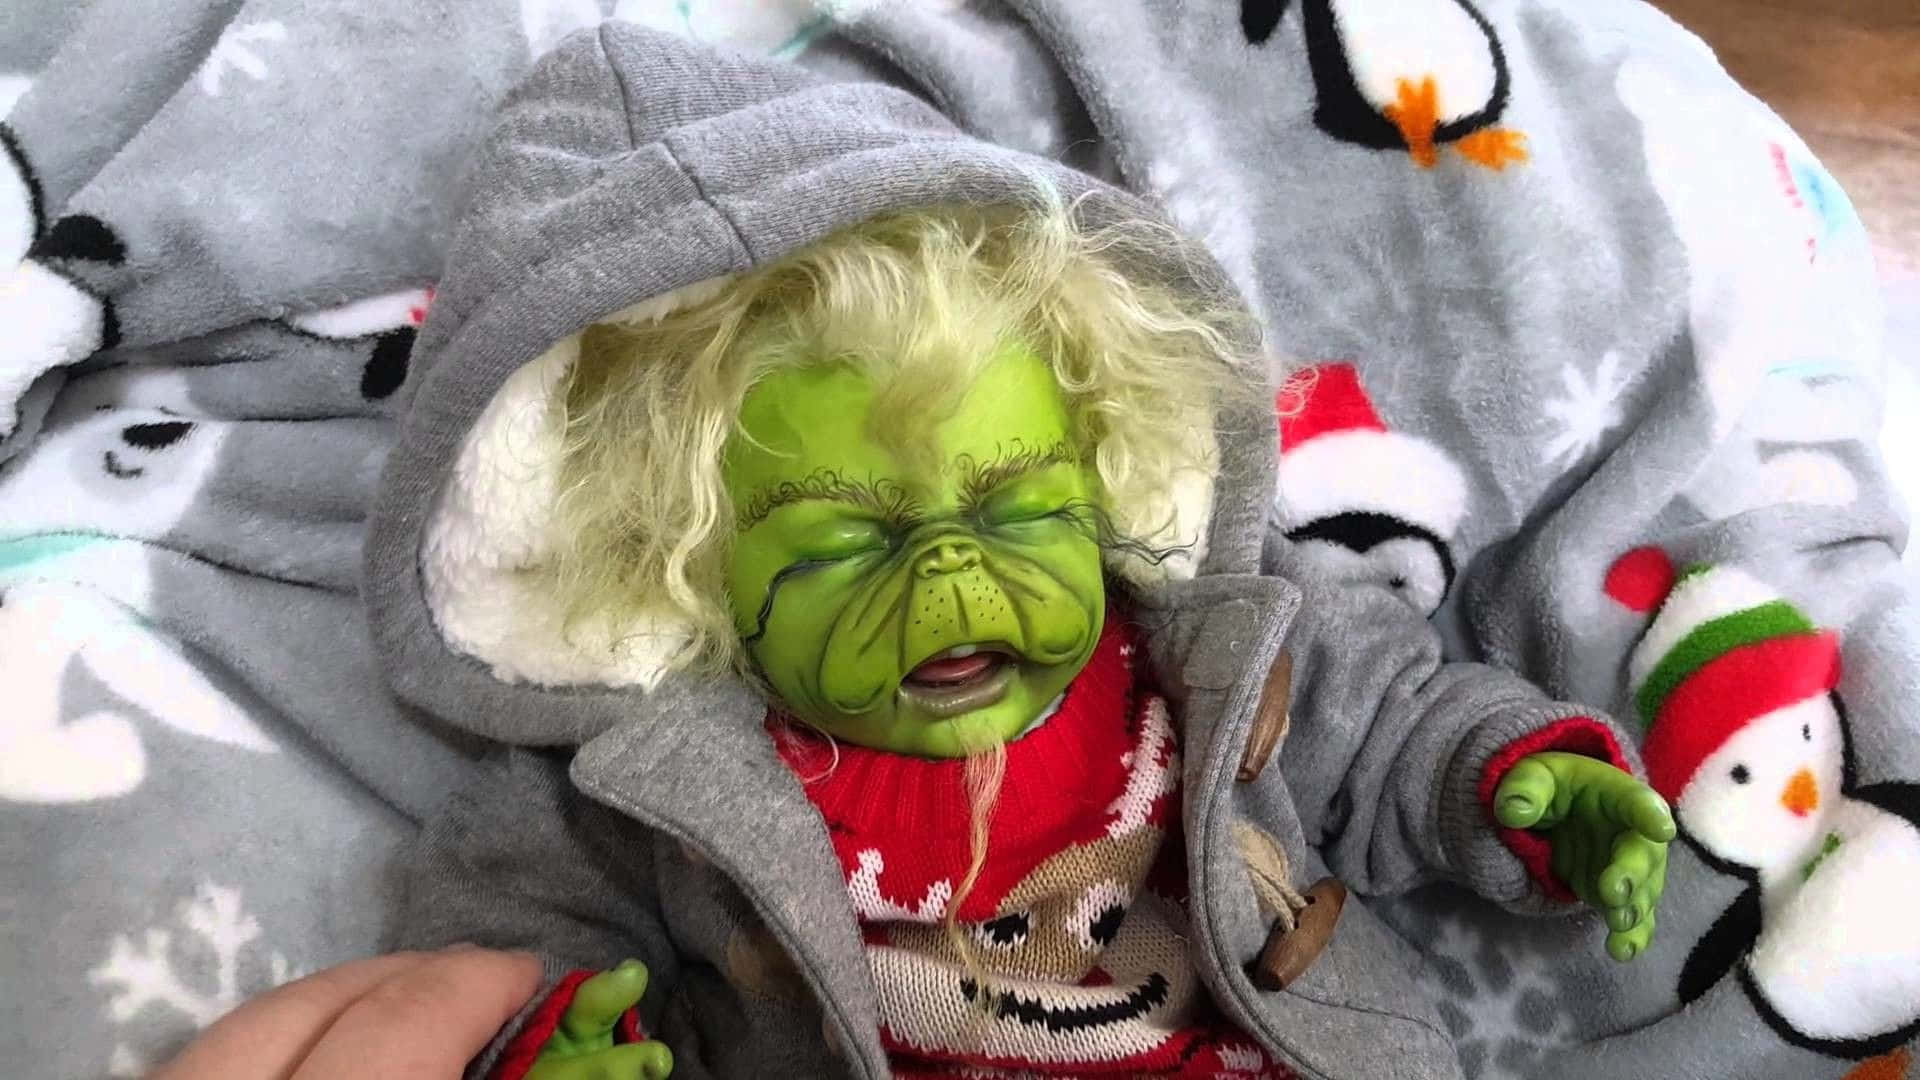 A Baby Dressed Up As The Grinch